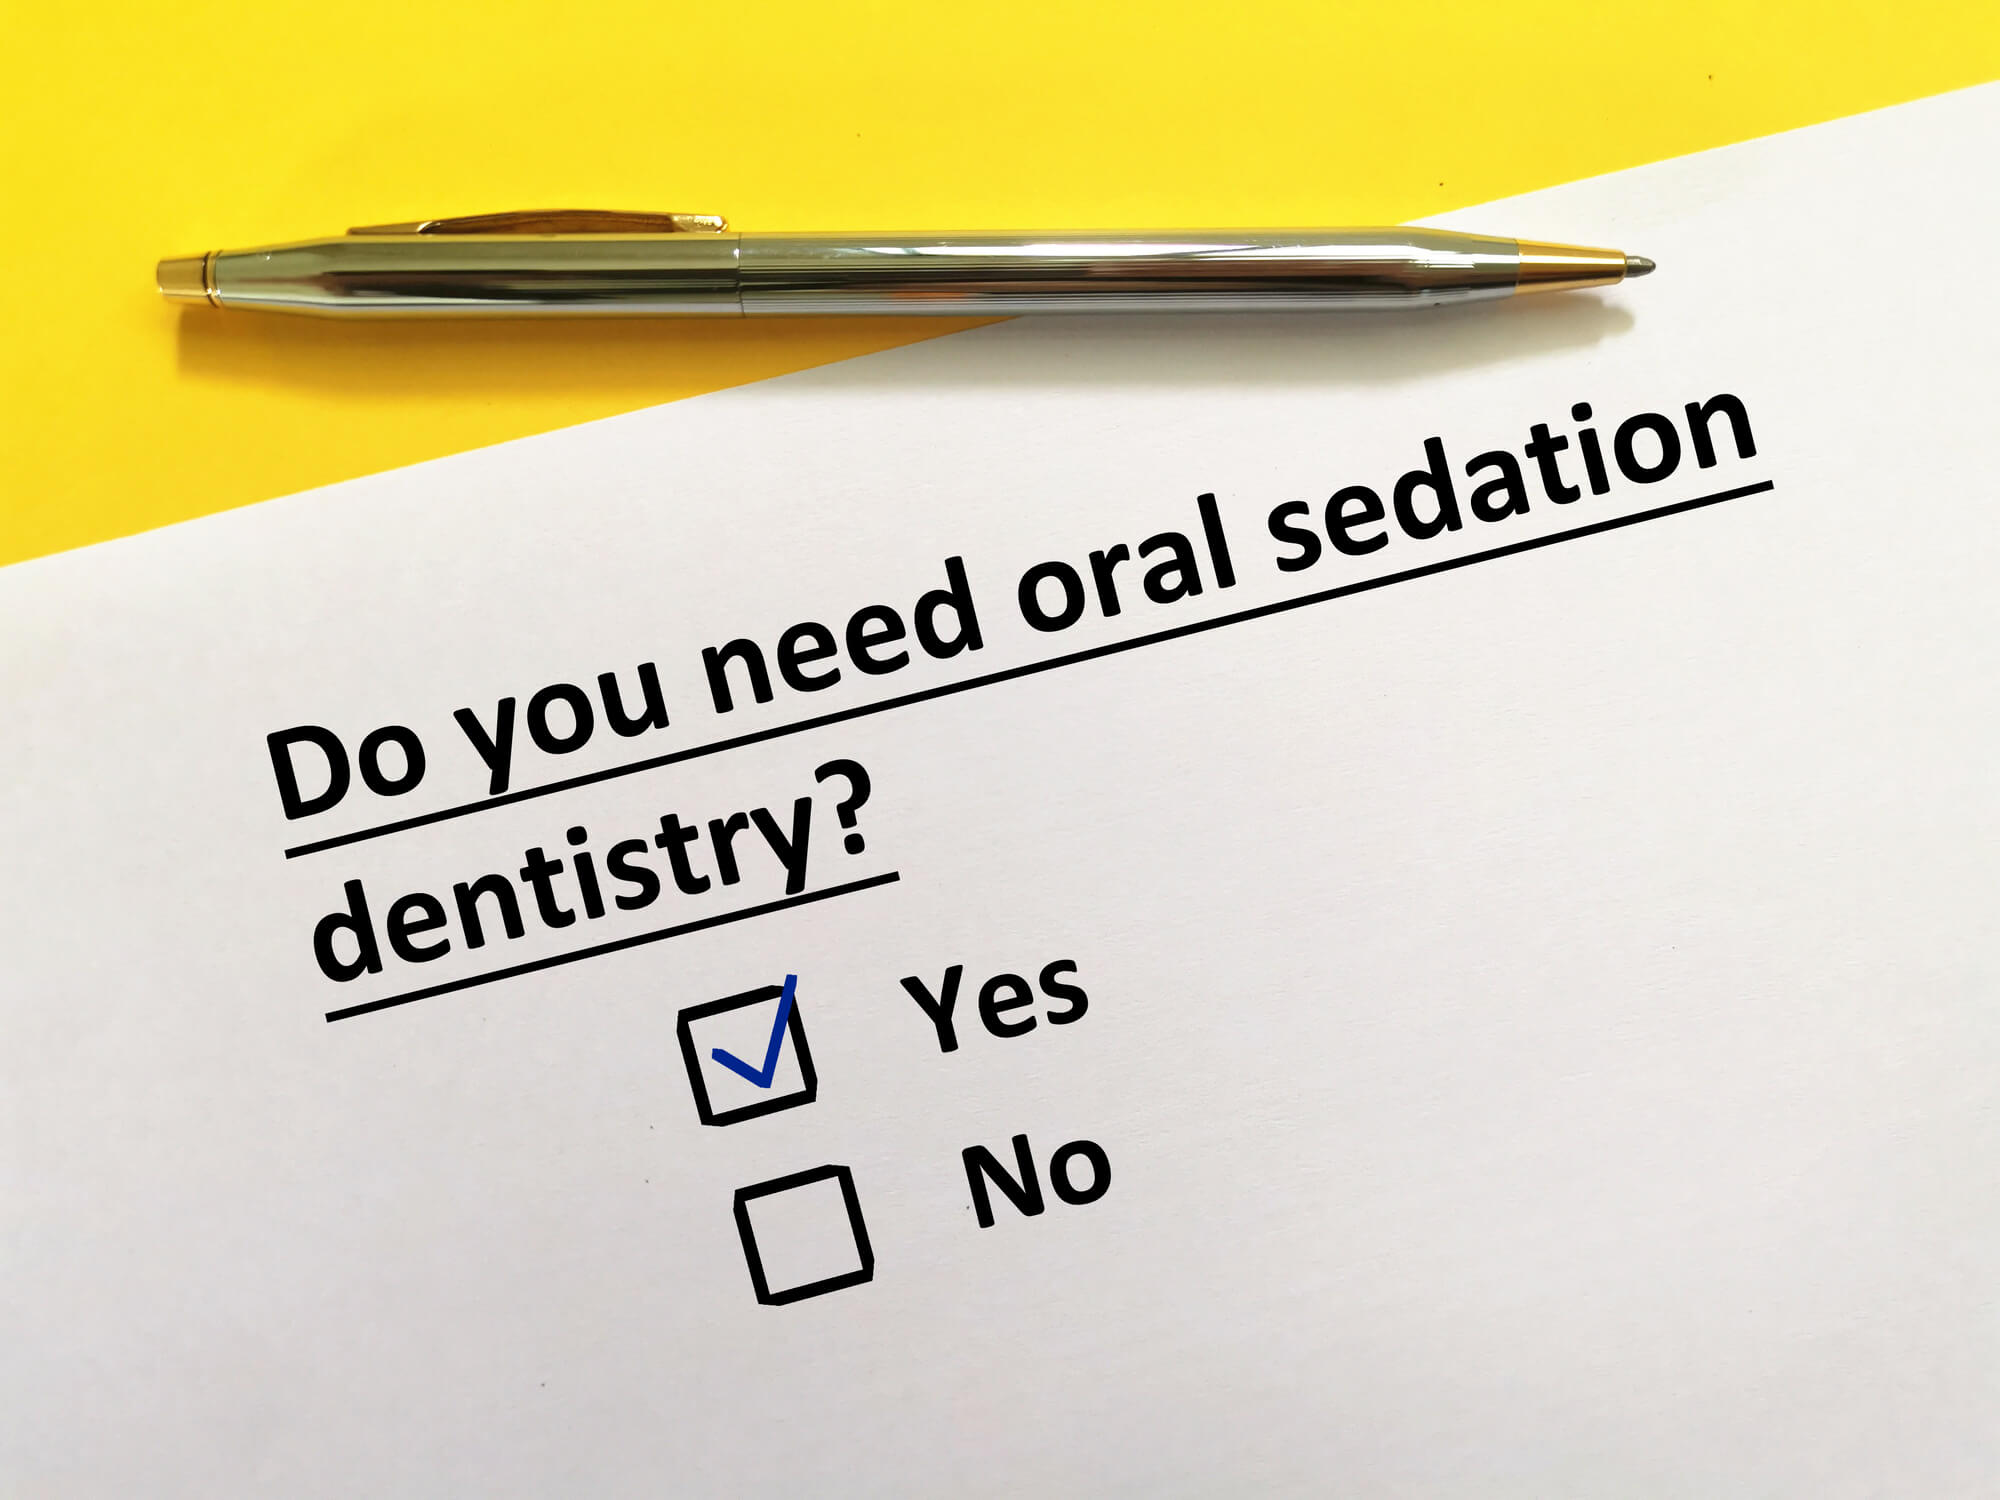 What Are the Commonly Used Sedation Dentistry Drugs?